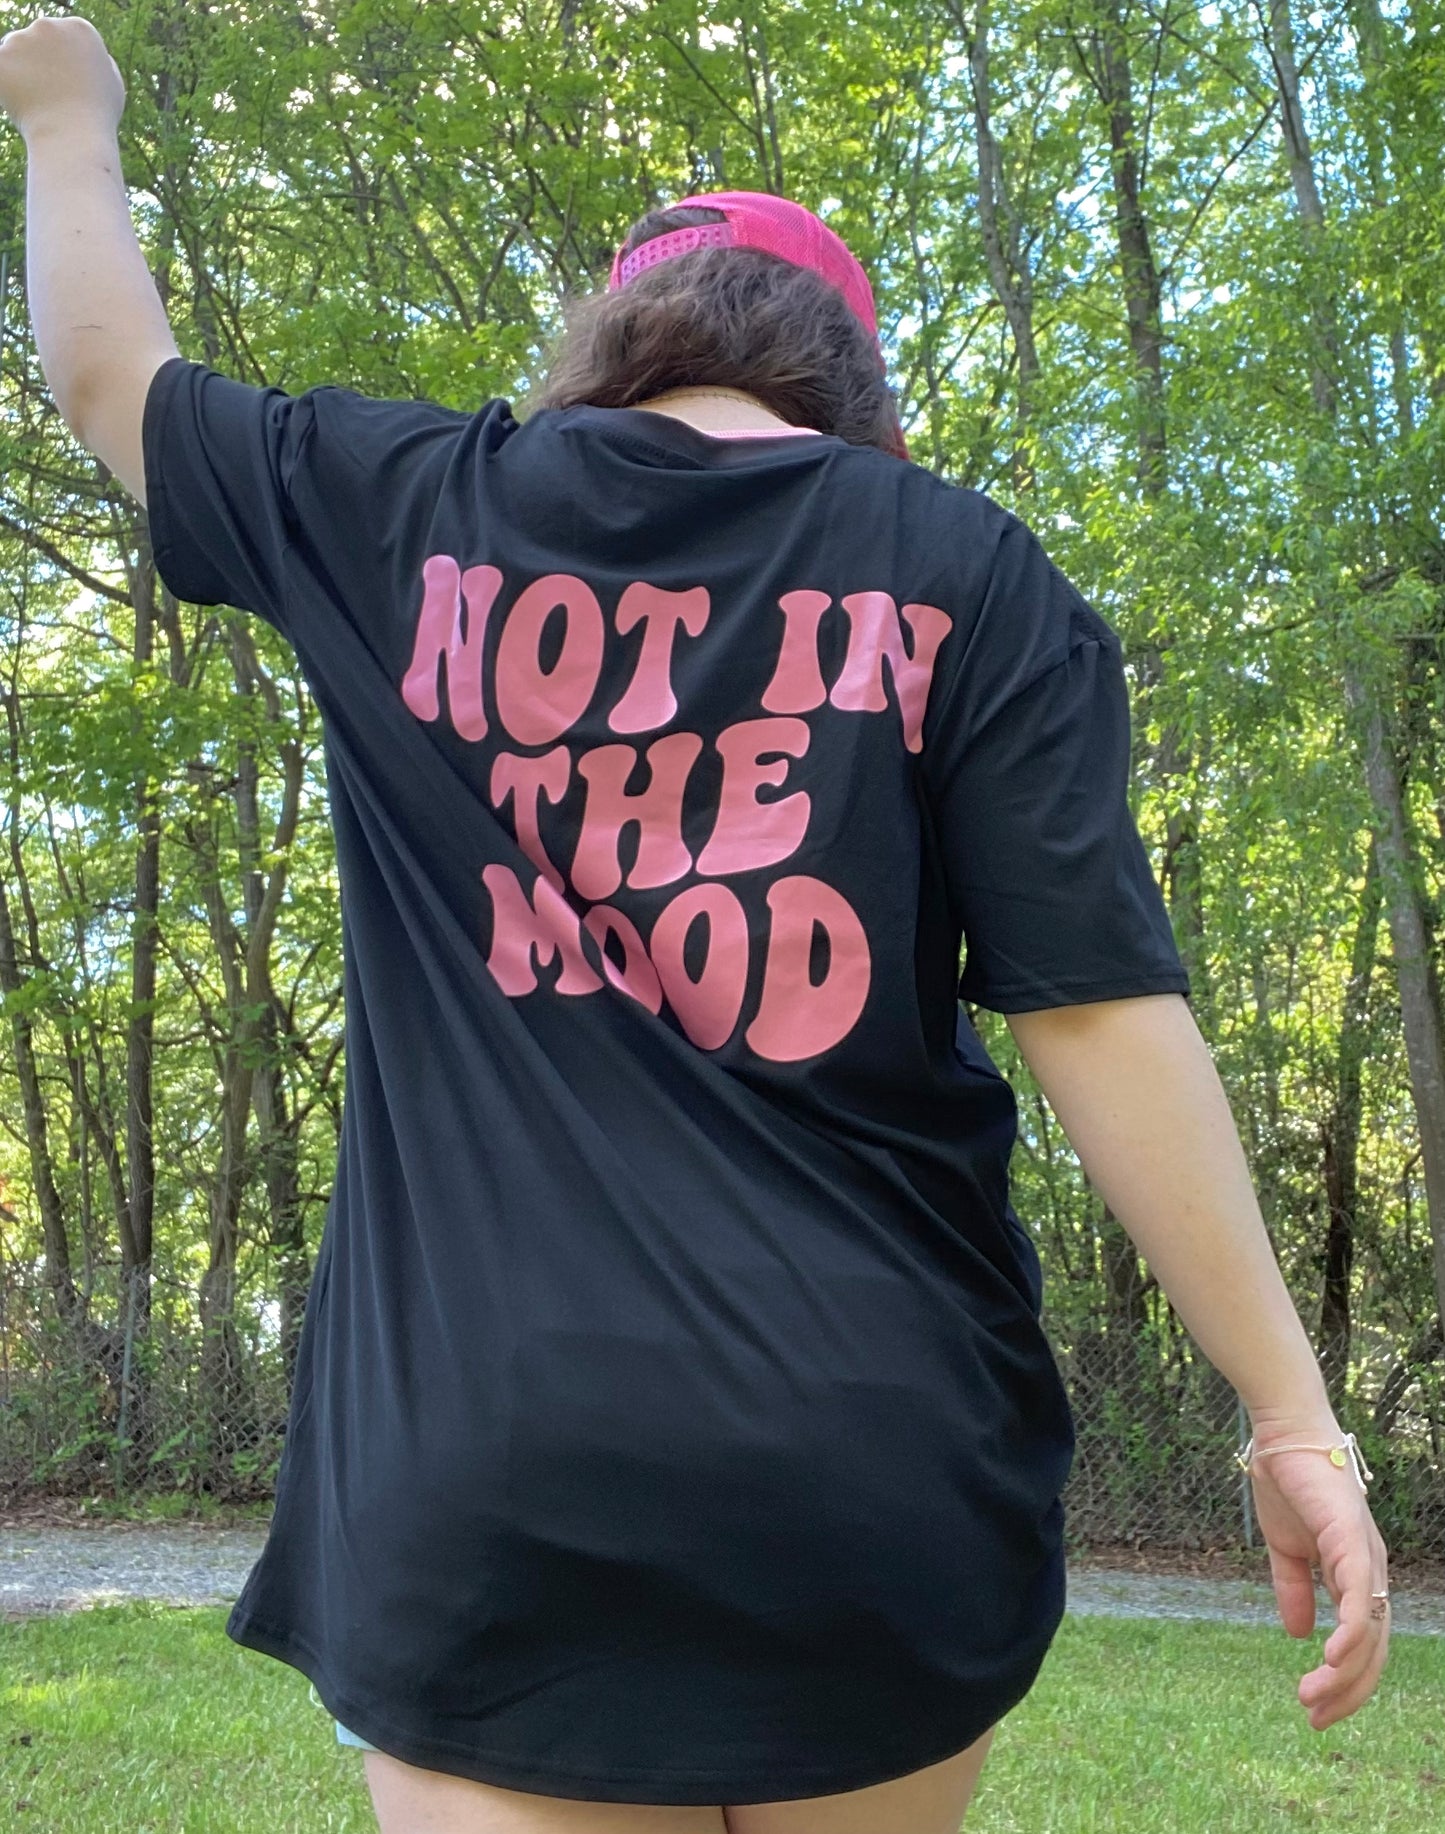 Not In The Mood Preppy Aesthetic Graphic Tee